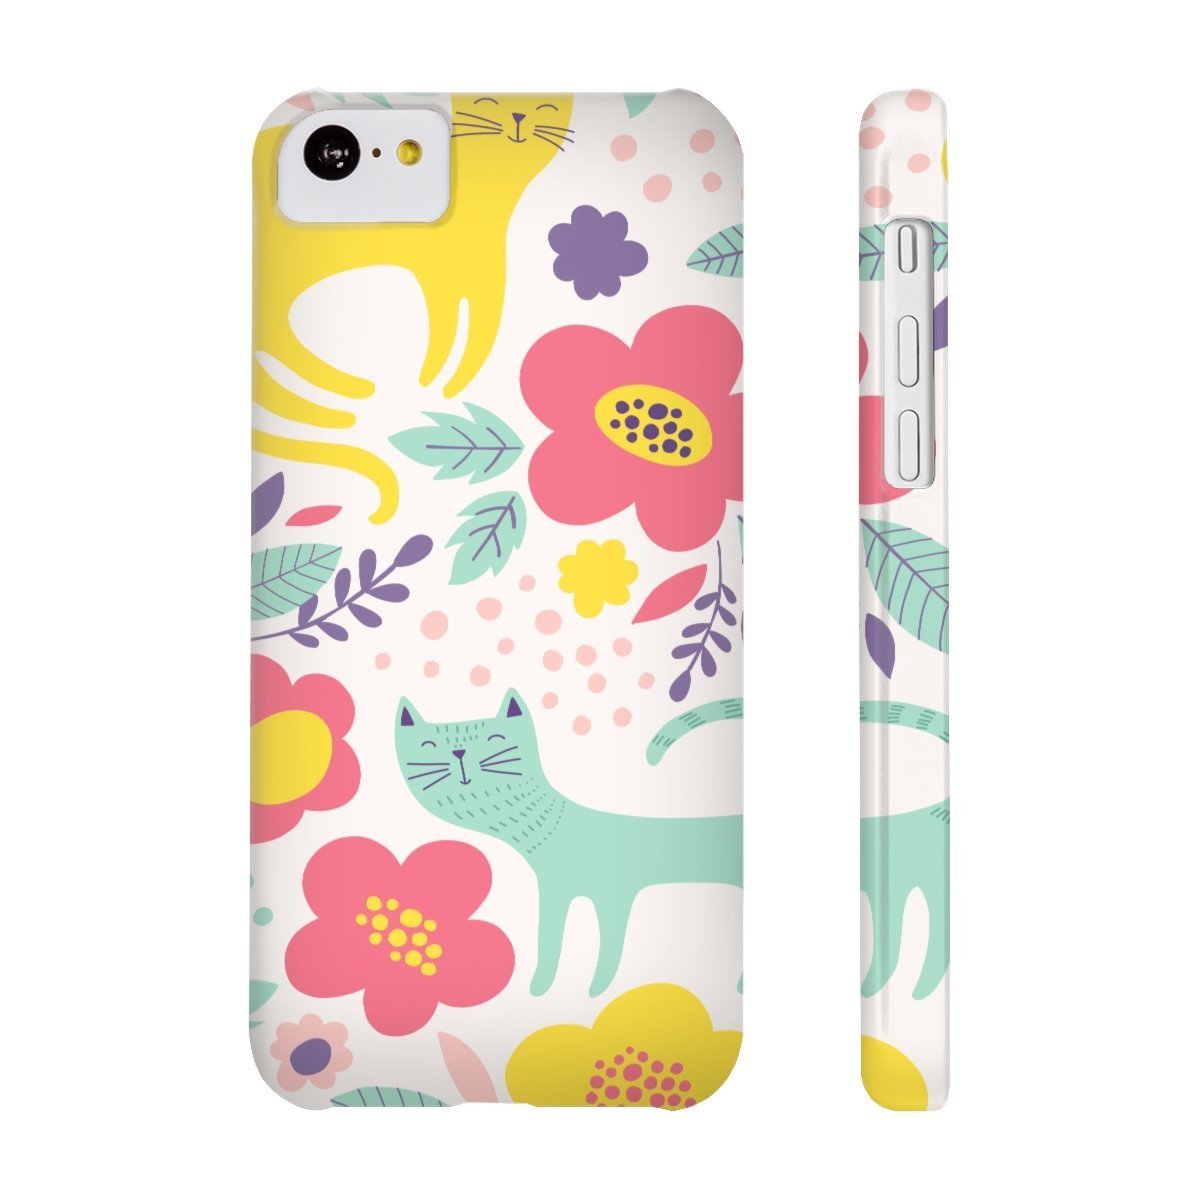 Phone Case with Cats, Cat iPhone Case Featuring a One of a Kind Floral Pattern with Cats